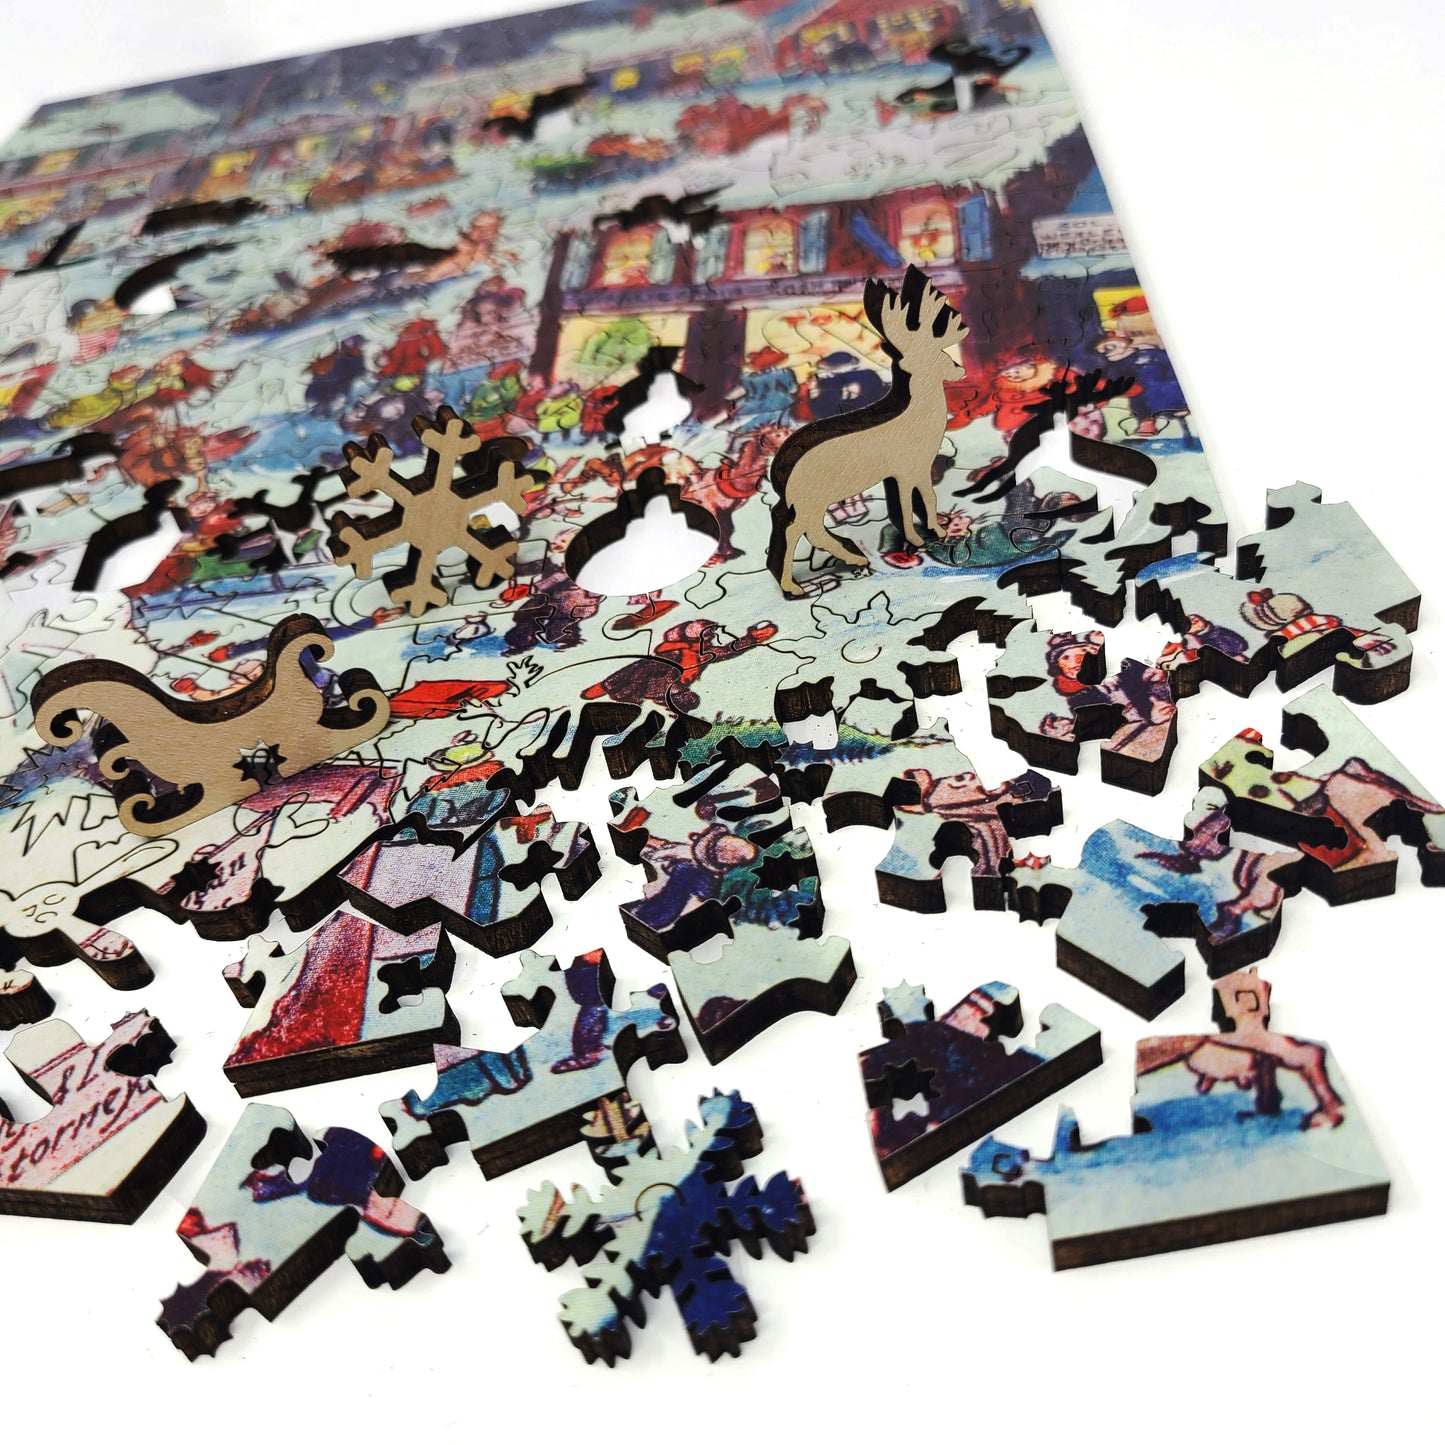 Wooden Jigsaw Puzzle with Uniquely Shaped Pieces for Adults - 263 Pieces - Christmas eve at Yapp's Crossing